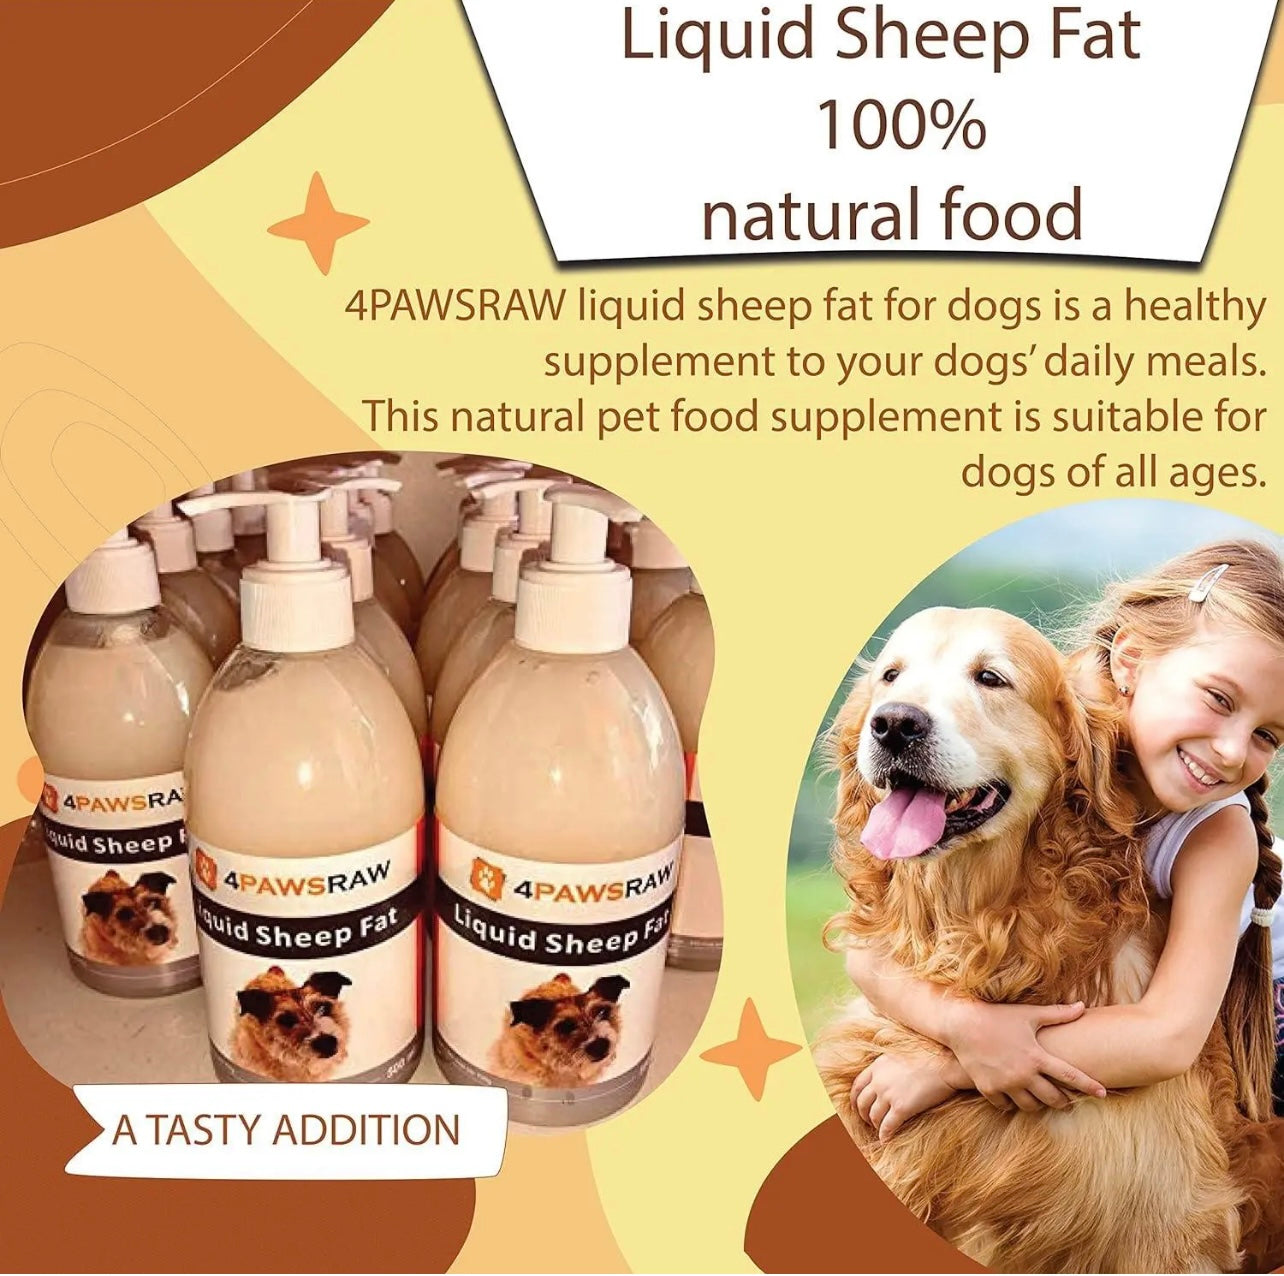 Liquid Sheep Fat – 100% natural food supplement for your dog.